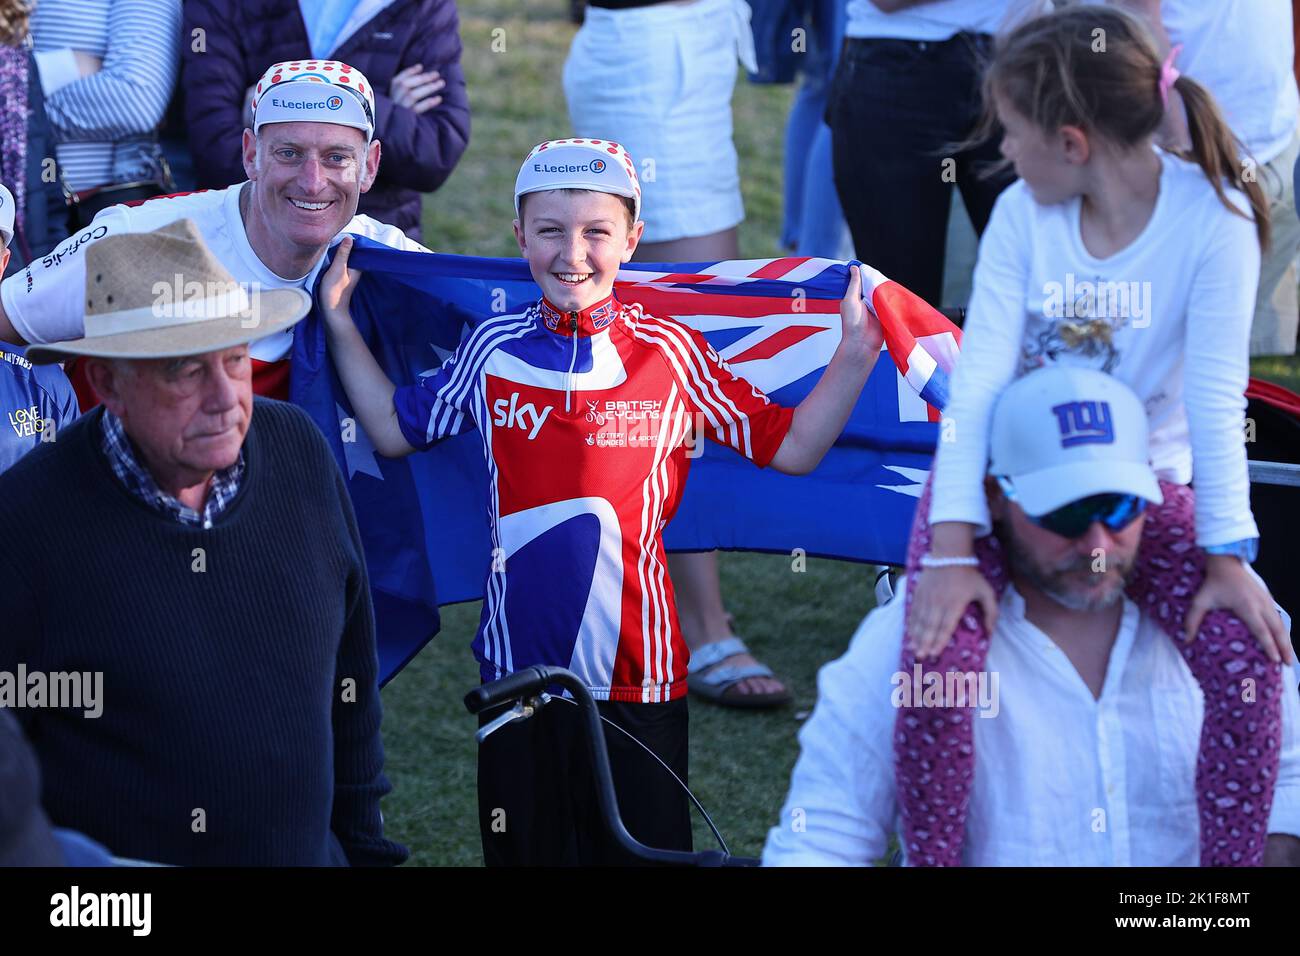 Wollongong, Illawarra, South, UK. 18th Sep, 2022. Australia: UCI World Road Cycling Championships, Men's Elite Time Trials: British supporters at the awards ceremony Credit: BSR Agency/Alamy Live News Stock Photo